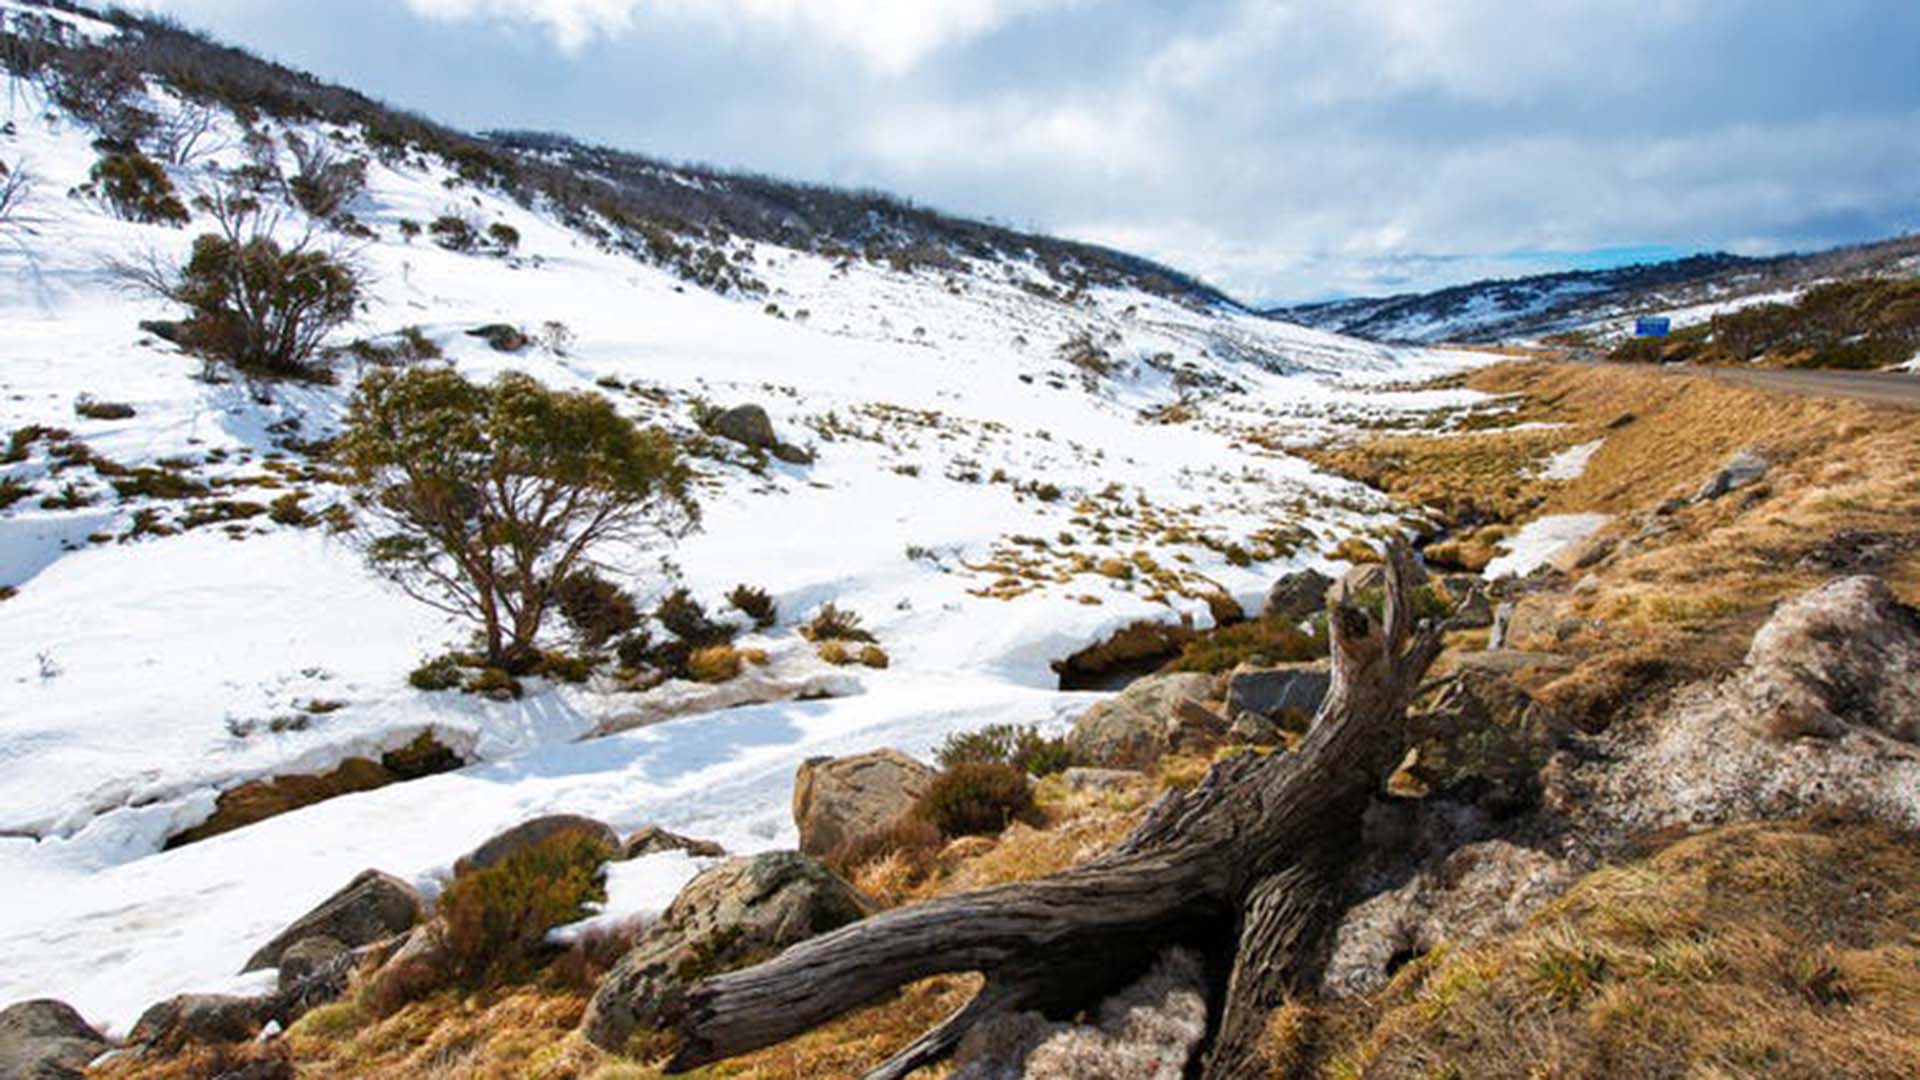 1,600 years ago, climate change hit the Australian Alps